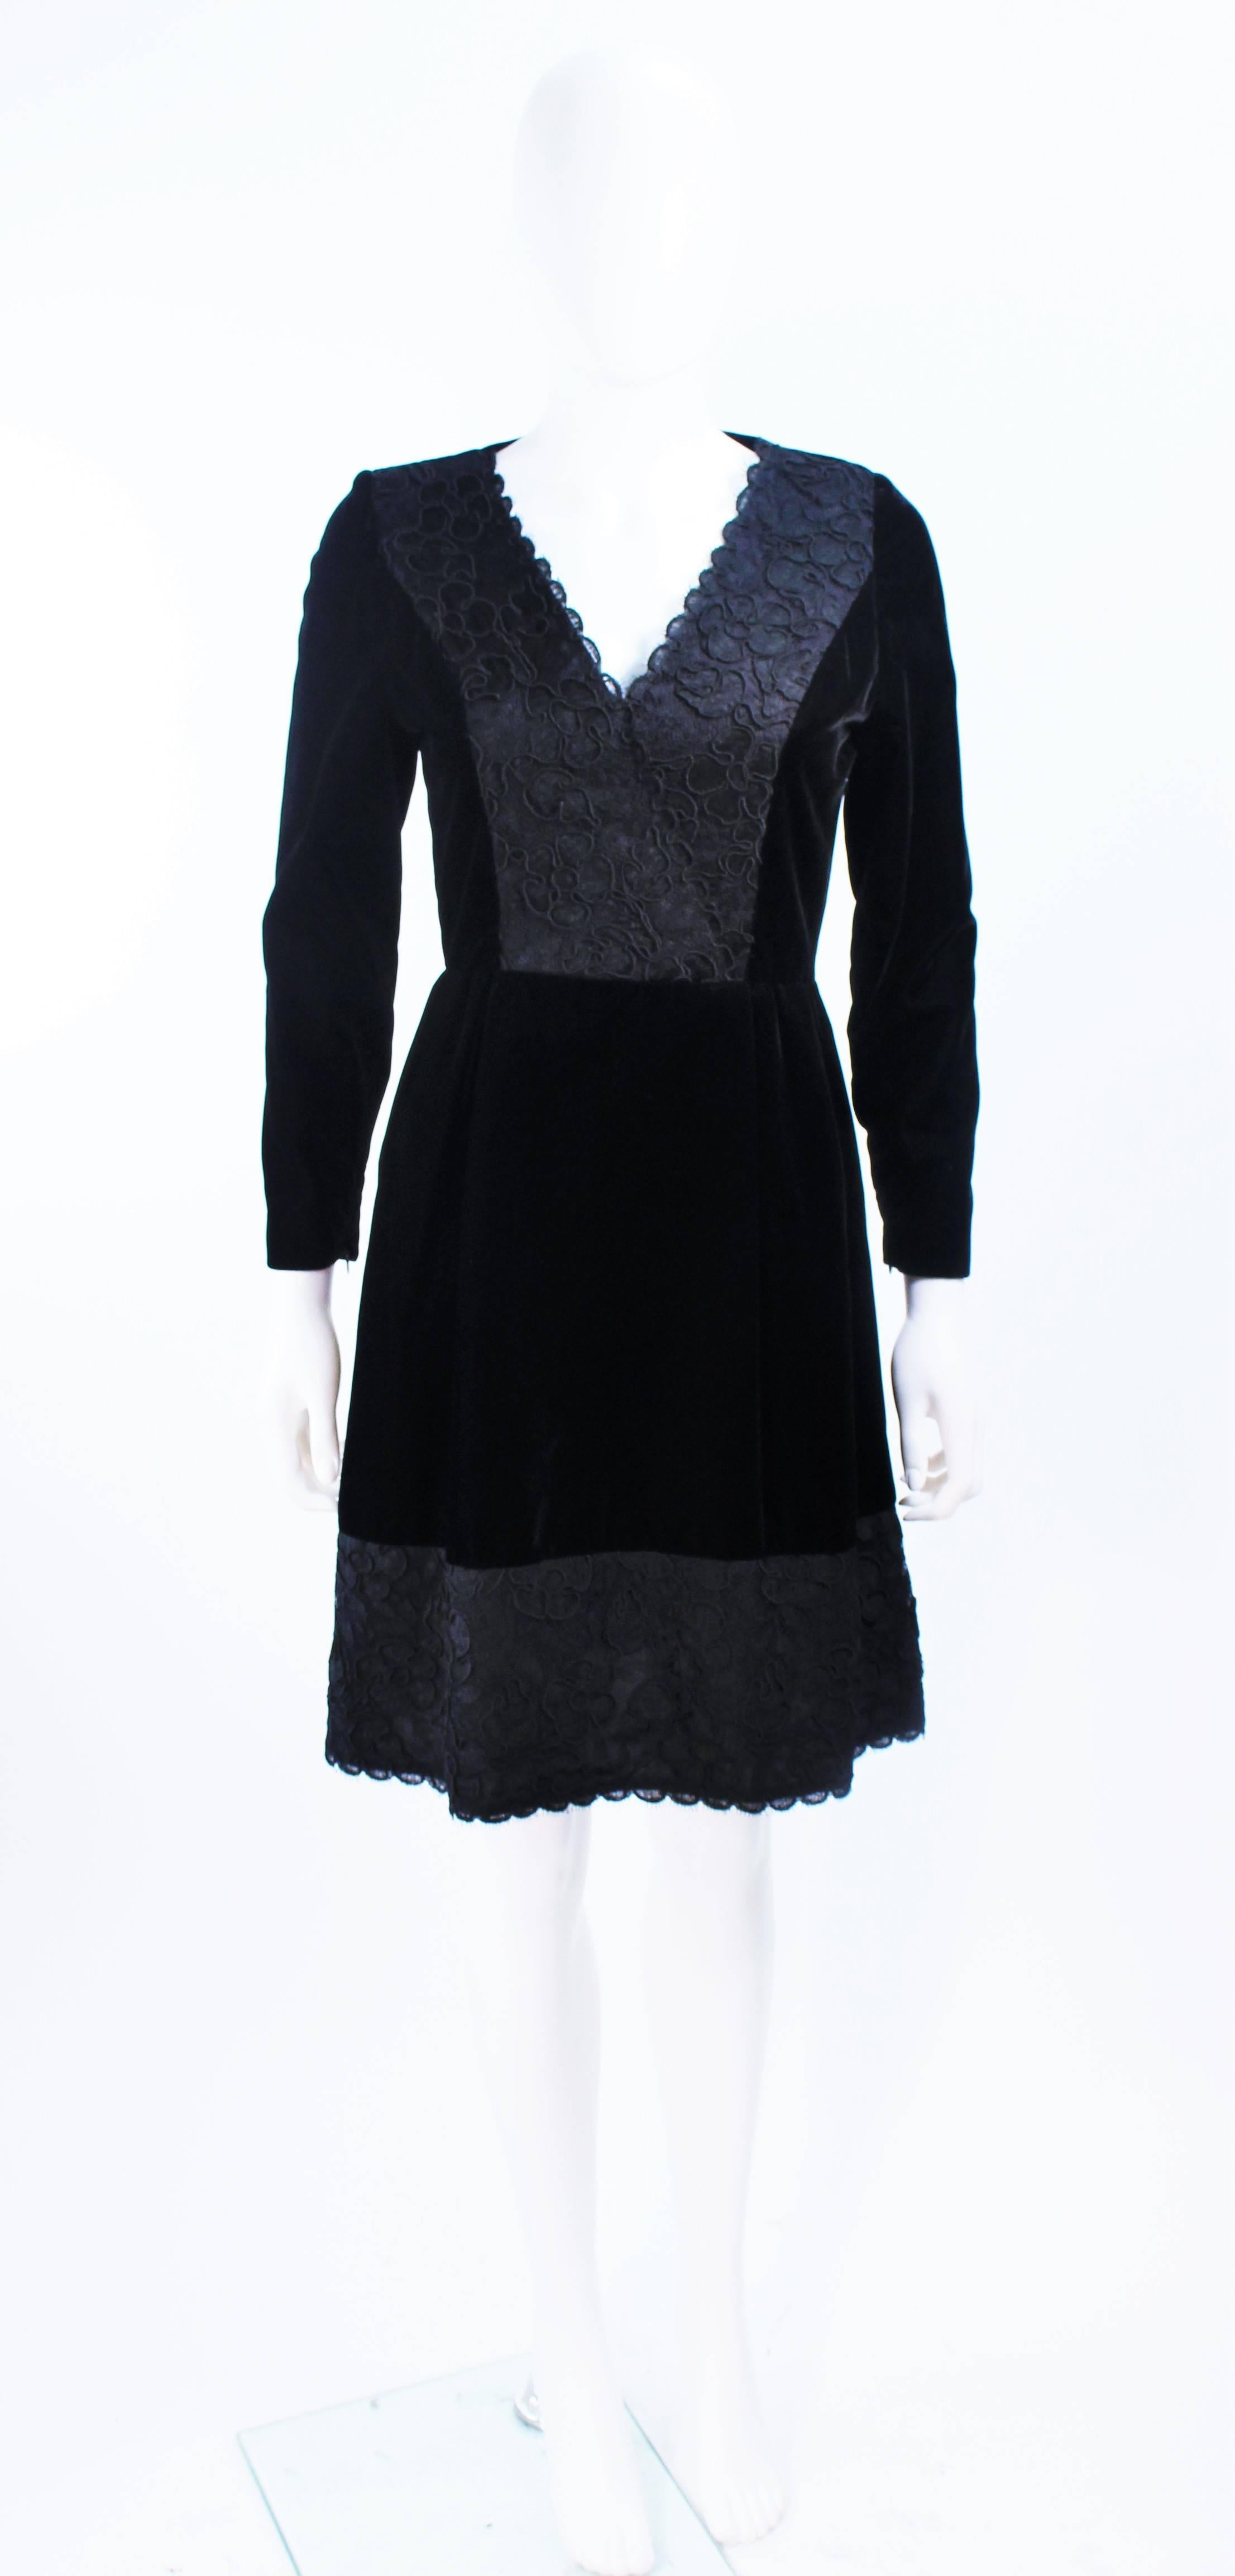 GIVENCHY Black Velvet Cocktail Dress with Lace Trim and Satin Belt Size 4 For Sale 2